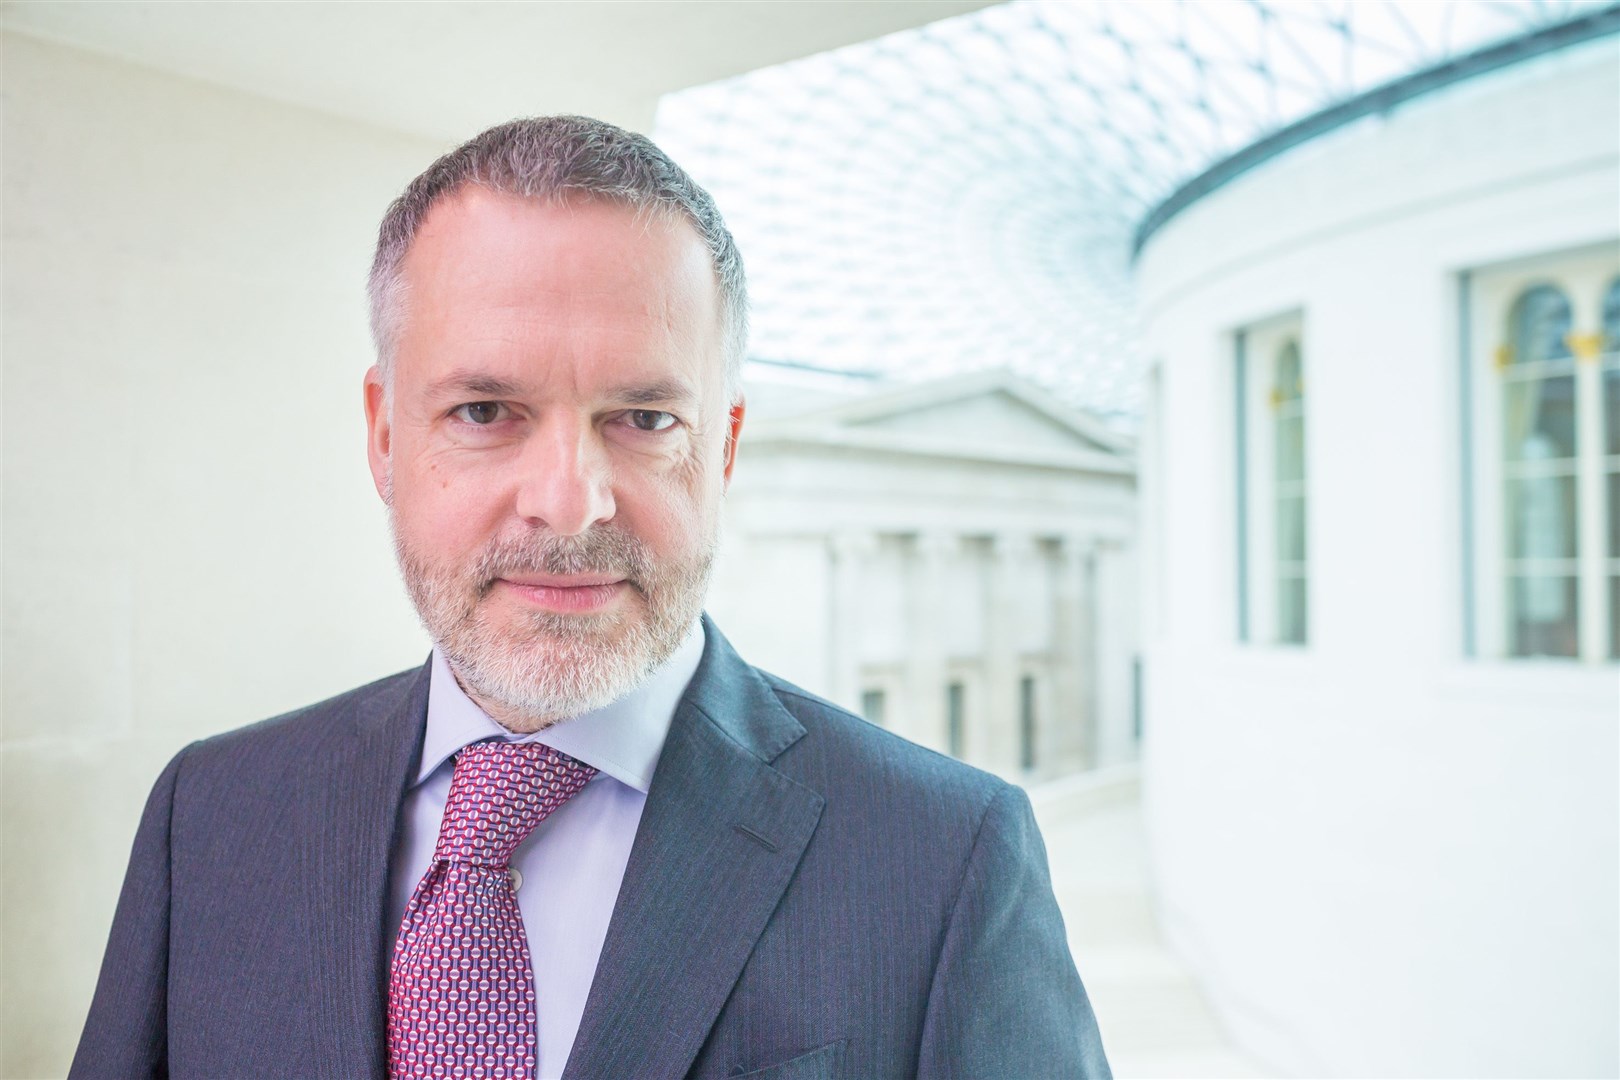 Hartwig Fischer stepped down as director of the British Museum (Benedict Johnson/The British Museum/PA)